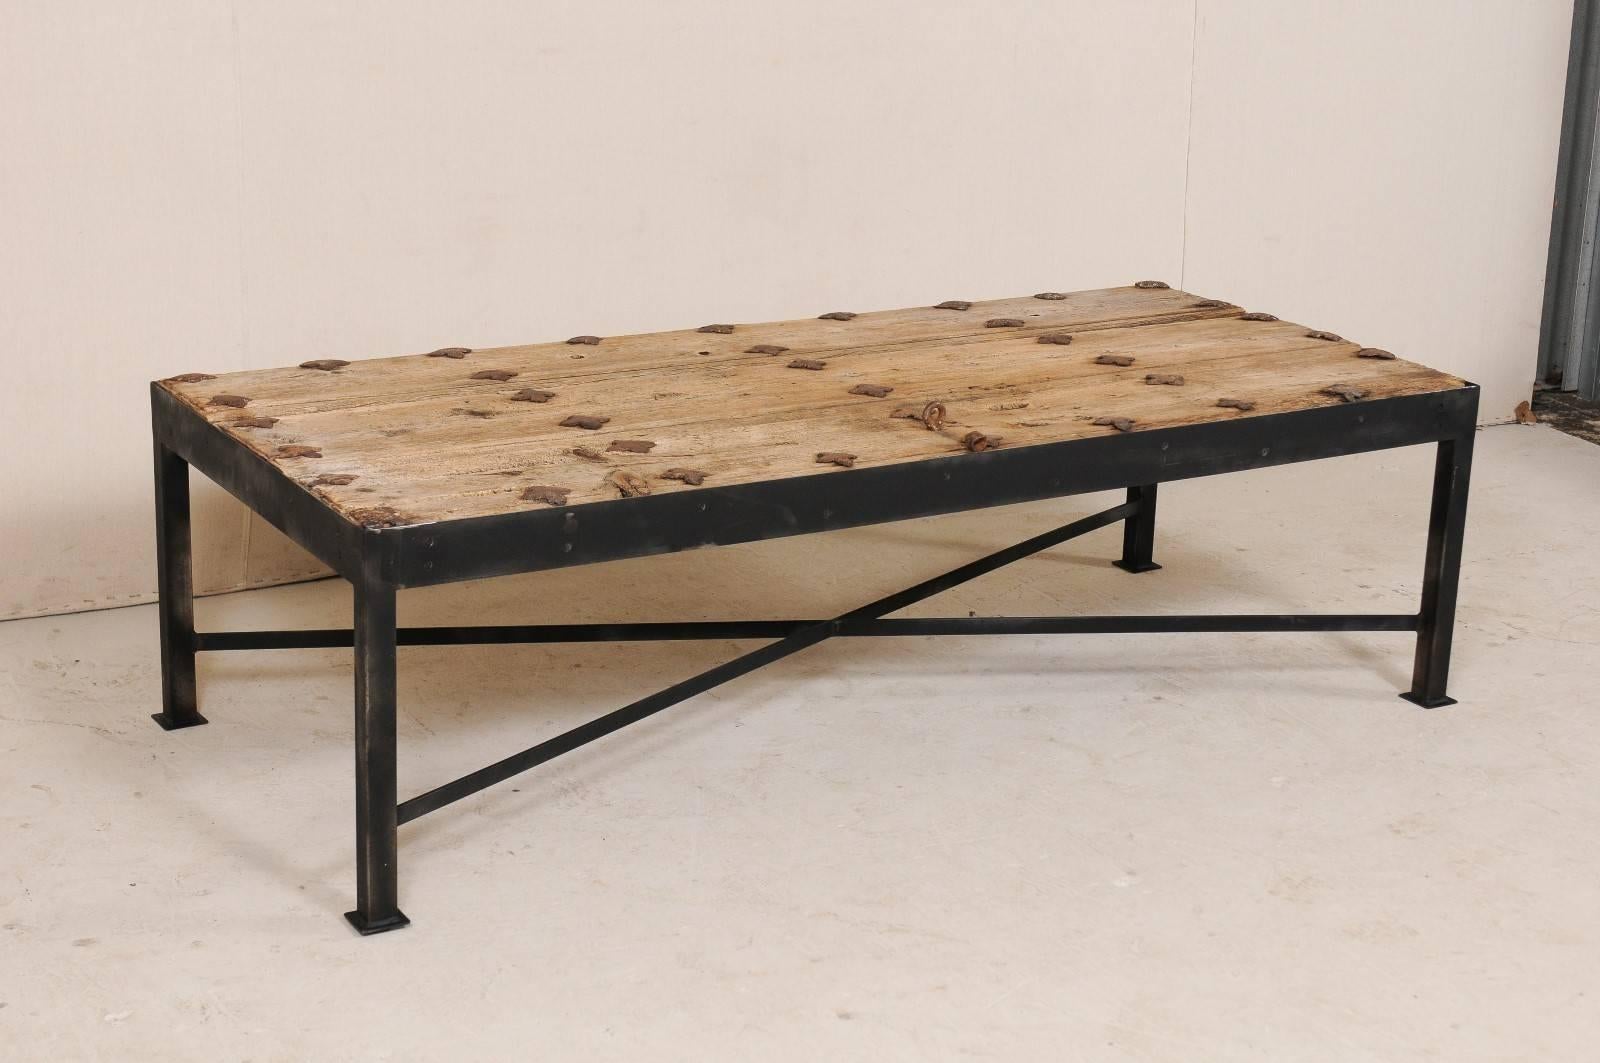 Rustic 18th Century Spanish Door Coffee Table with Patinated Iron Quatrefoil Grommets